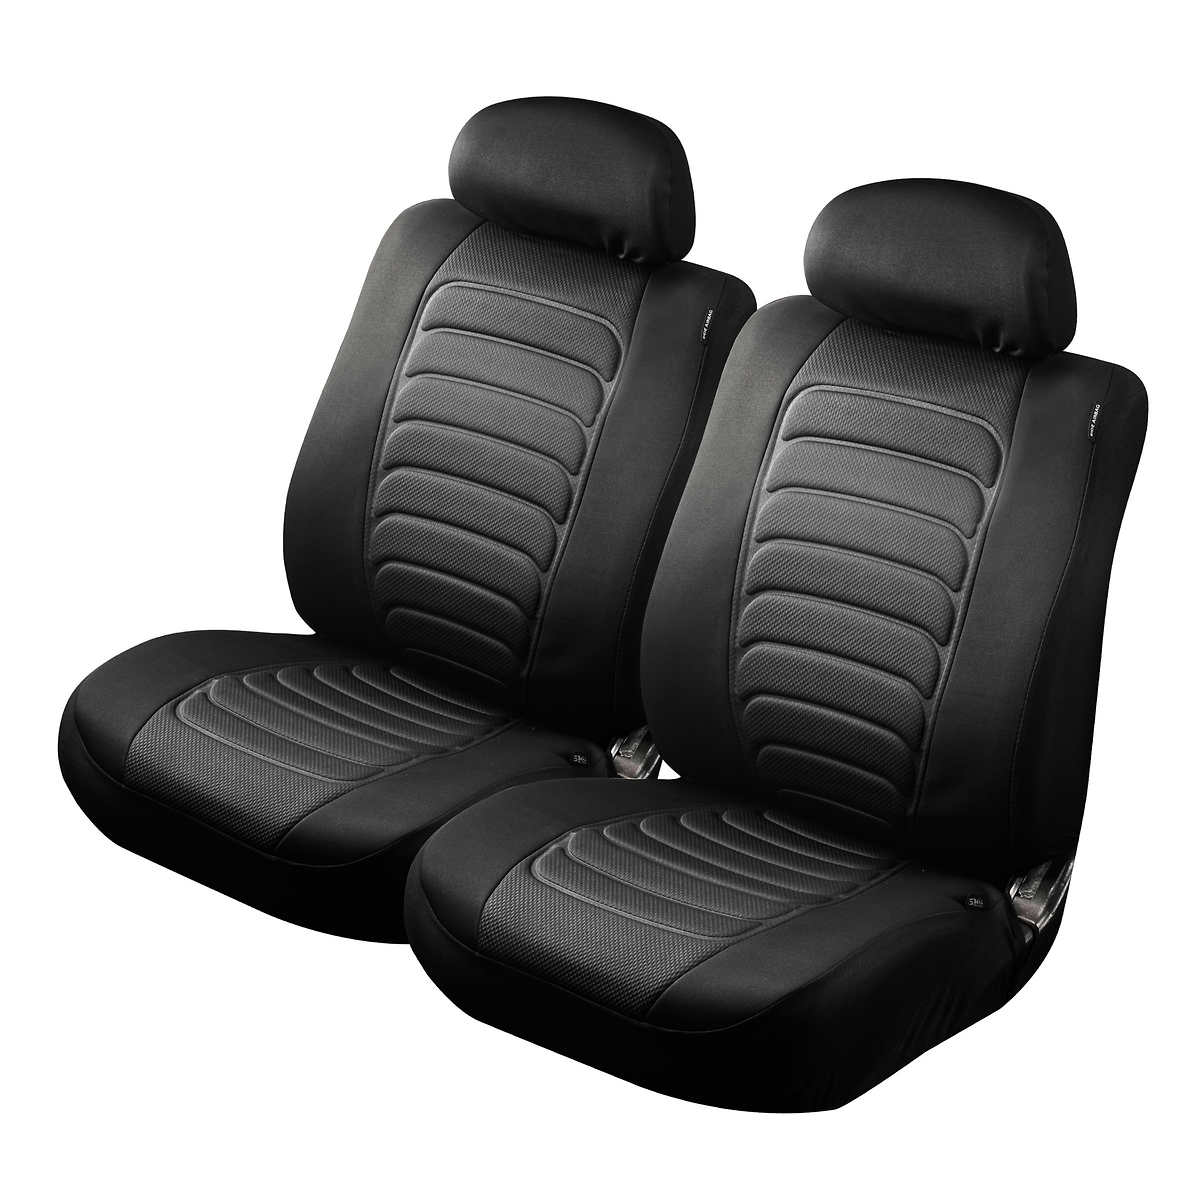 Type S Wetsuit Seat Covers With Antibacterial Technology 2 Pack Costco - How To Clean Neoprene Seat Covers